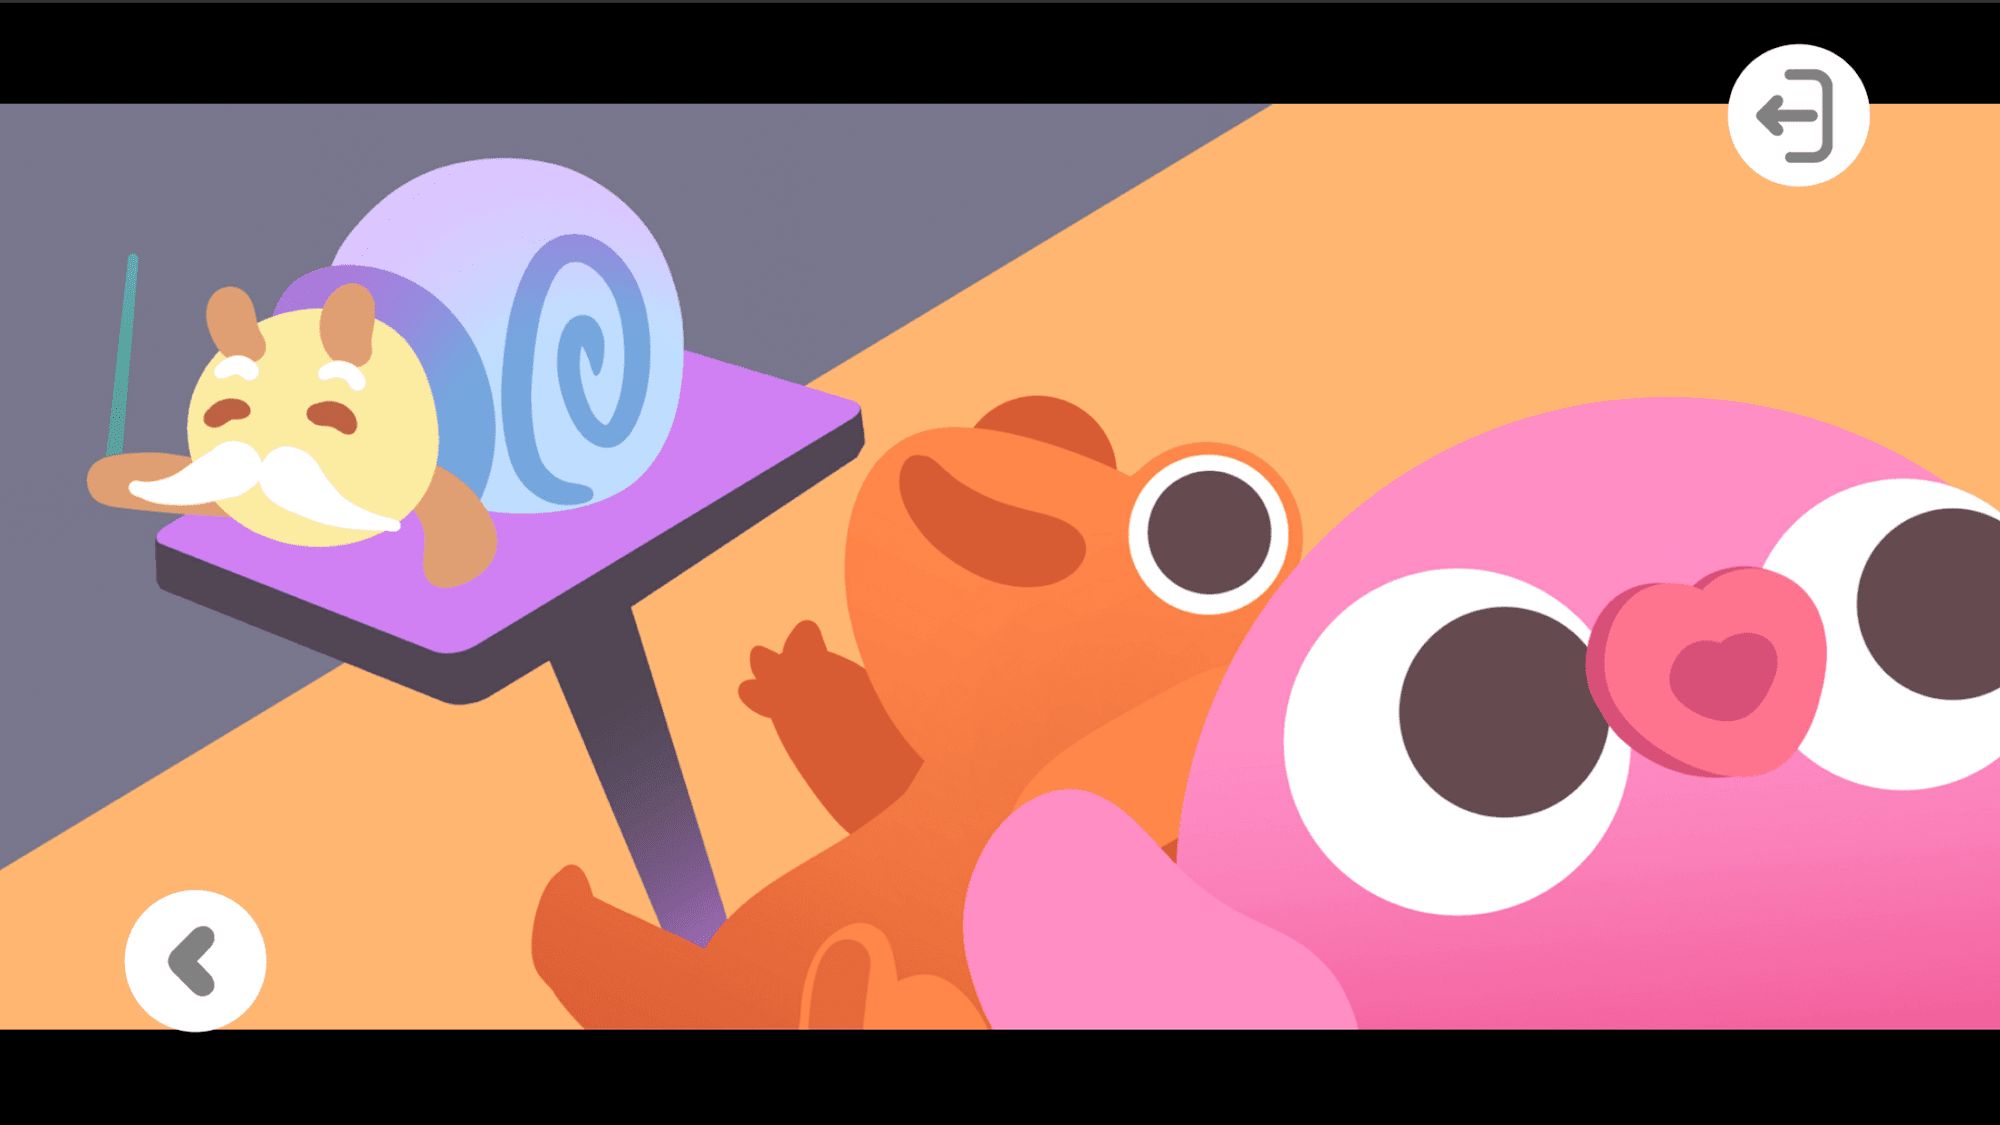 Takoway - A deceptively cute puzzler for Android